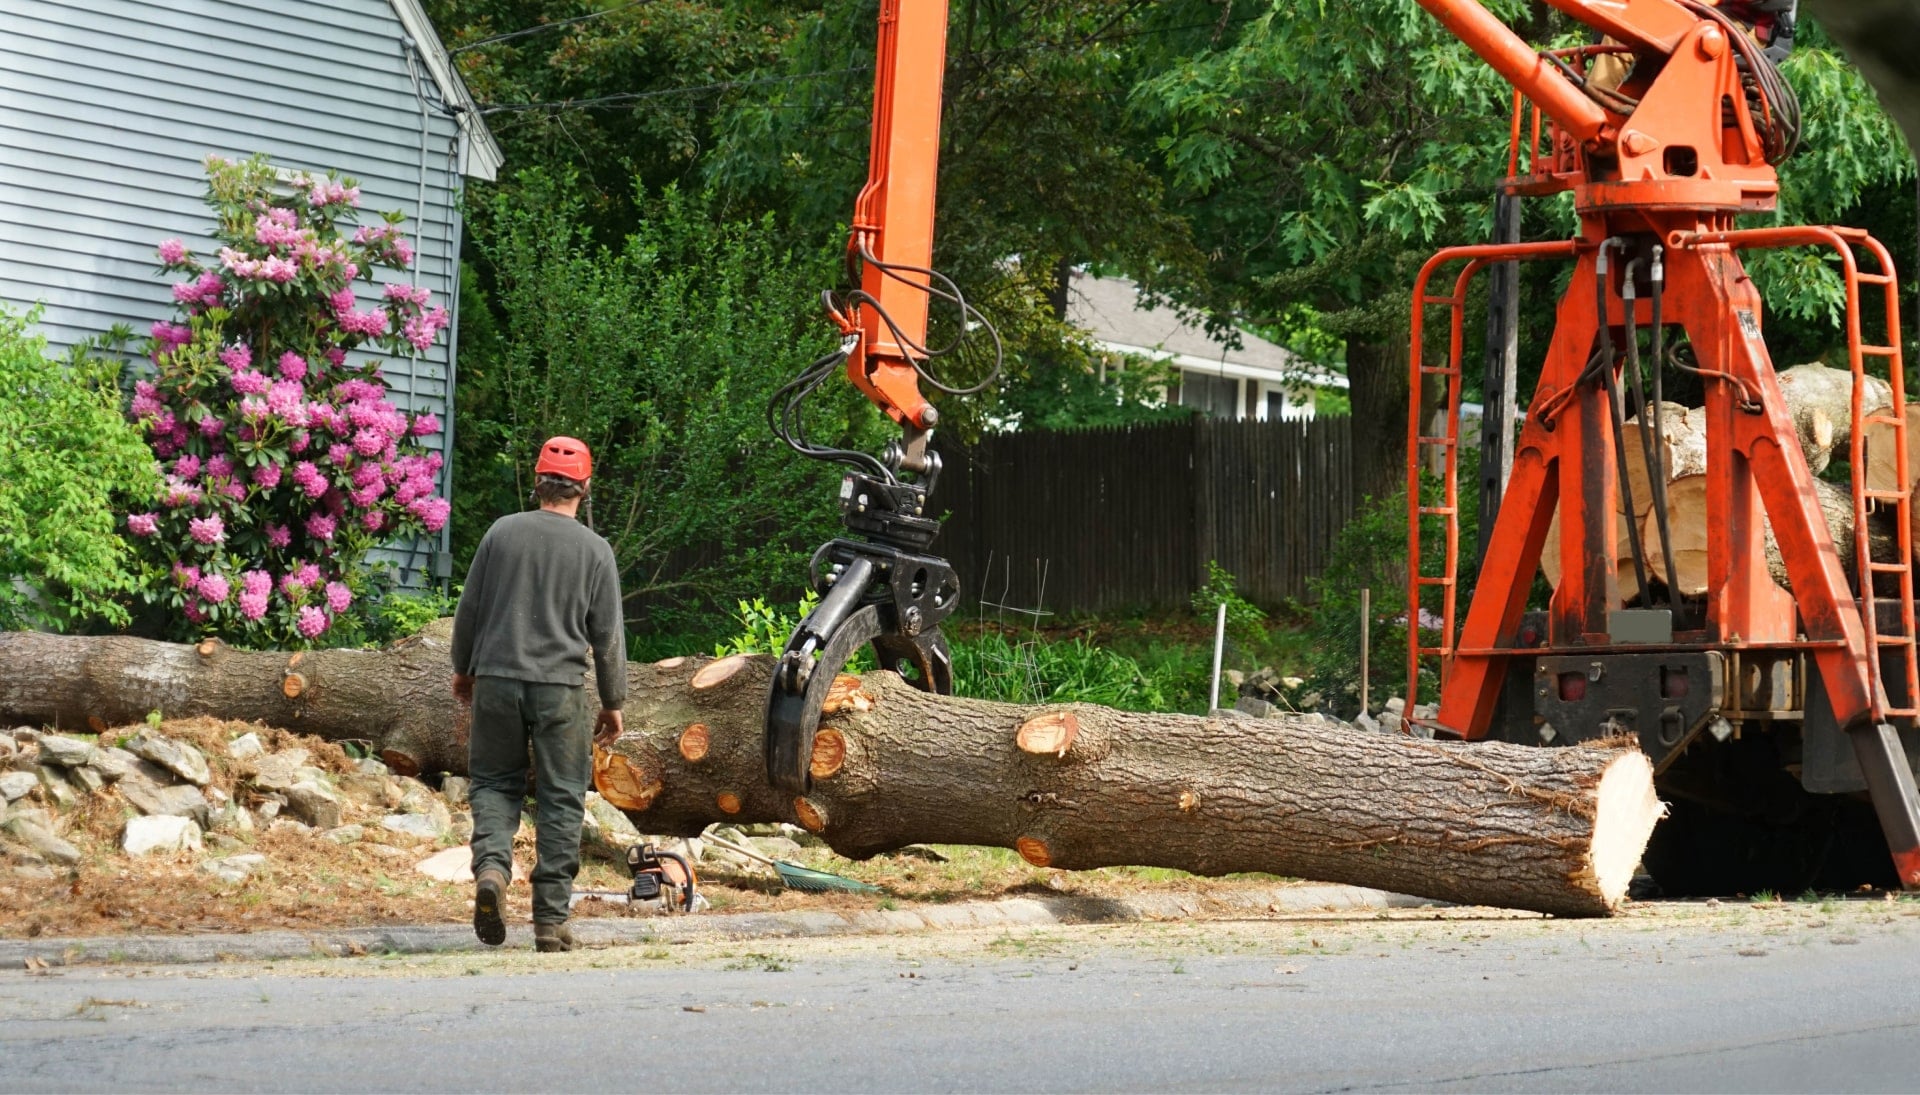 Local partner for Tree removal services in Pasadena